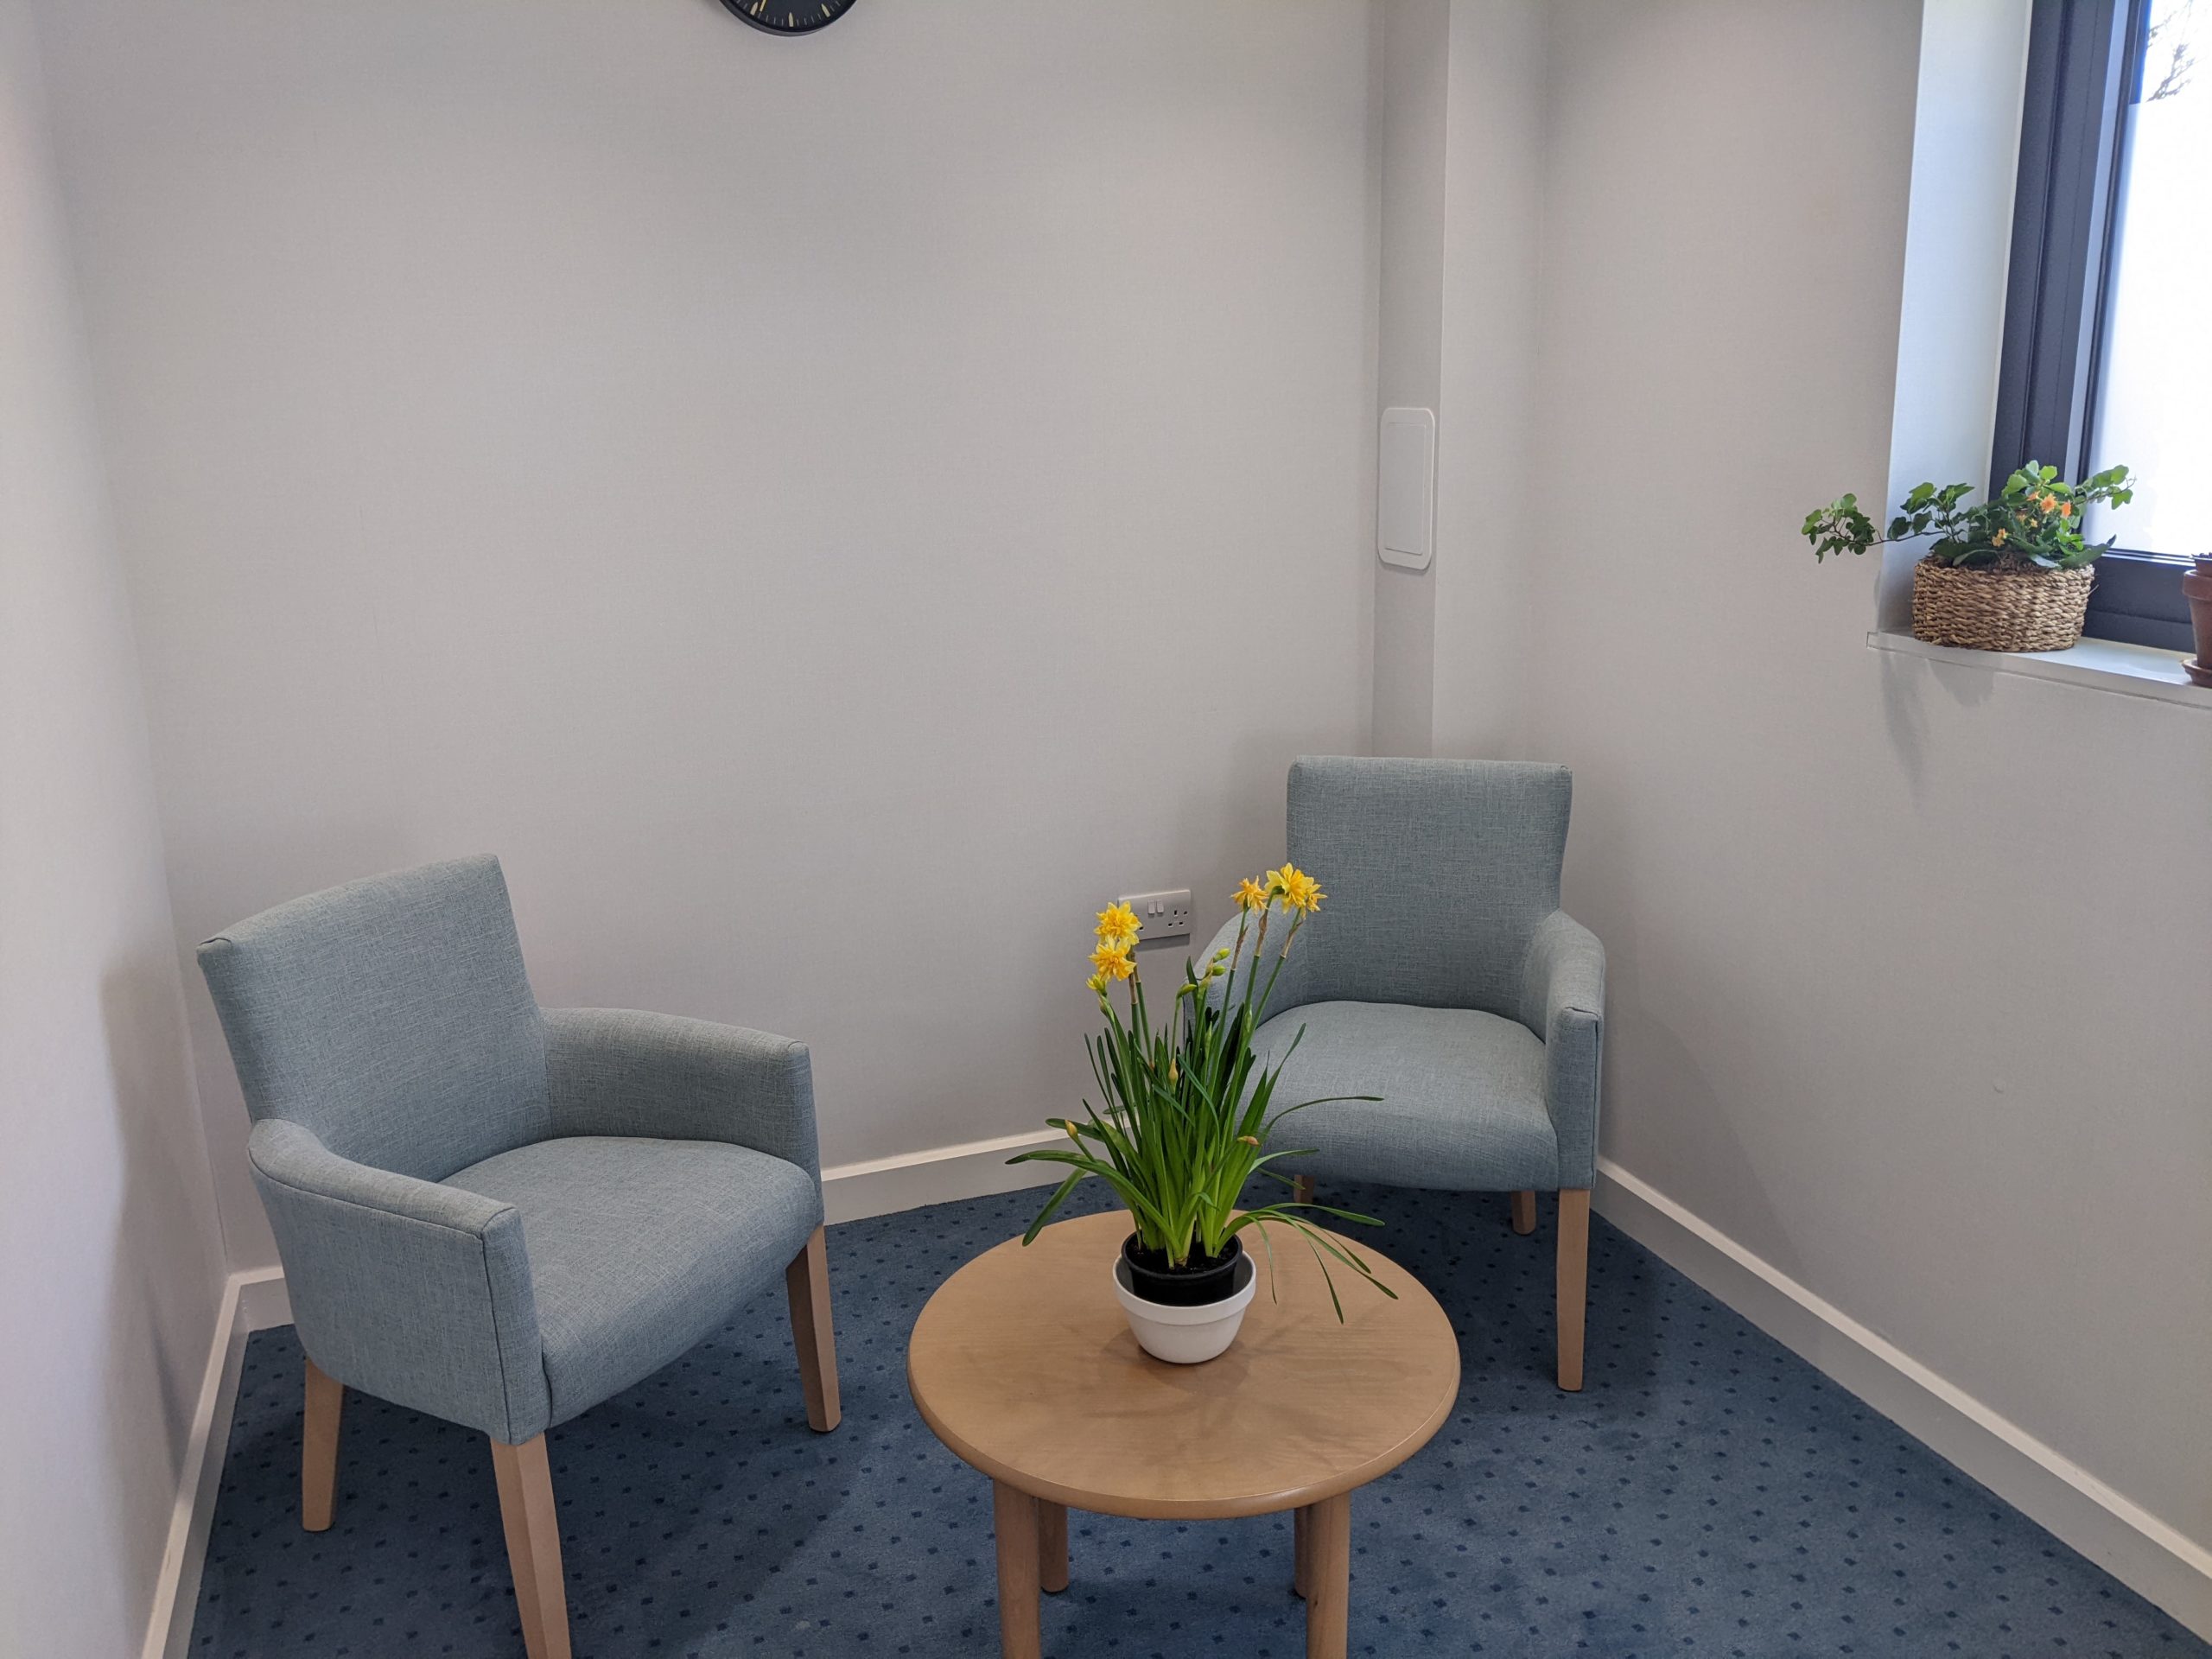 Small consulting room